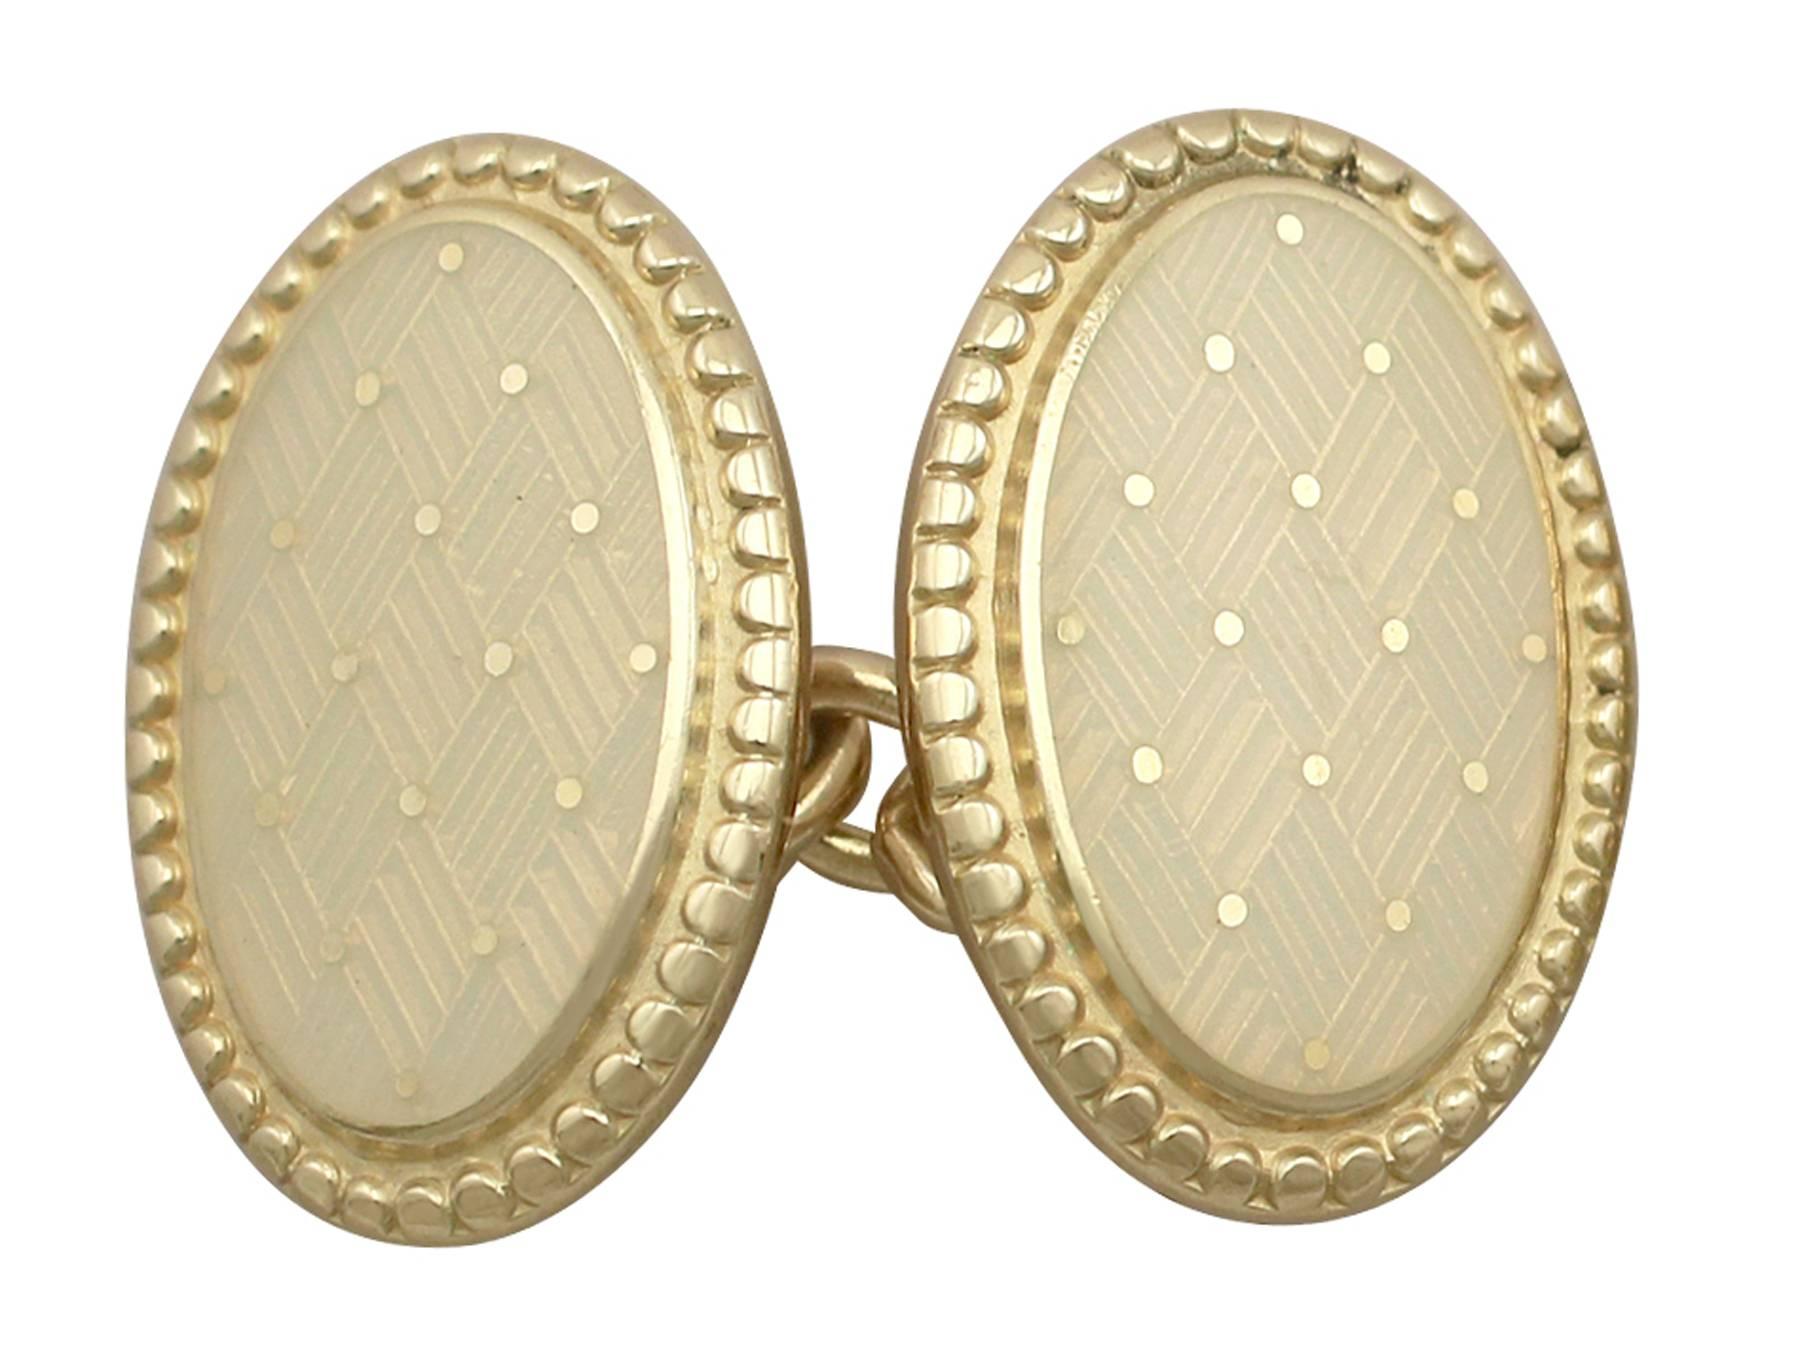 An exceptional contemporary pair of white enamel and 18 carat yellow gold cufflinks by Longmire; part of our diverse gent's jewellery collections.

These exceptional, fine and impressive Longmire* cufflinks have been crafted in 18 ct yellow